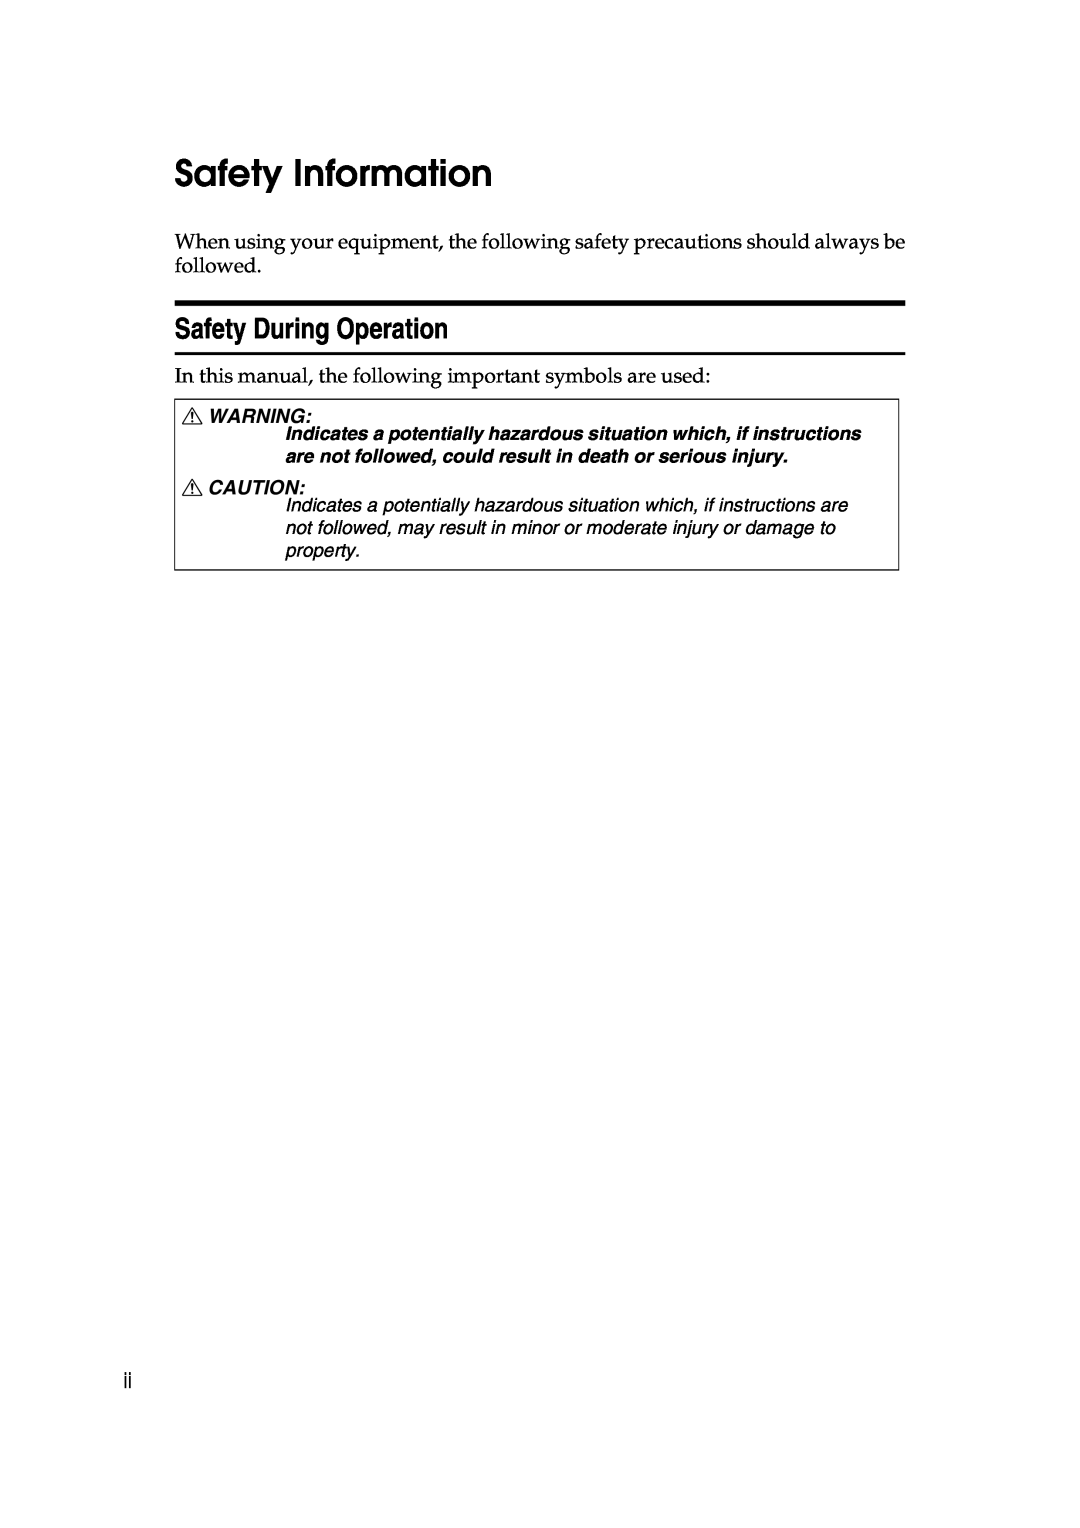 Lanier AP3200 manual Safety Information, Safety During Operation 